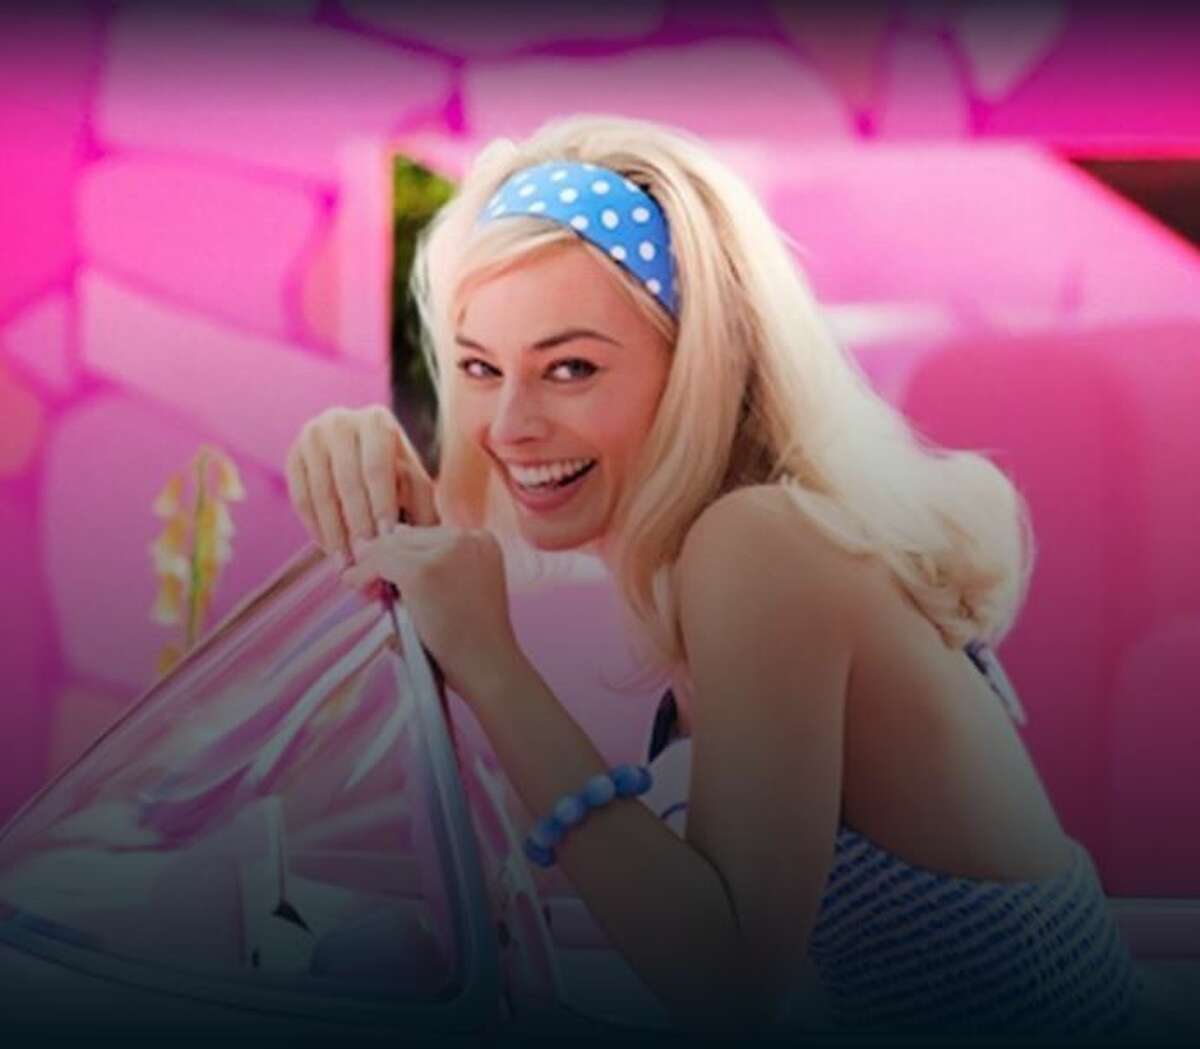 The hit movie "Barbie" is available on-demand from Spectrum cable and on a number of streaming services as of Sept. 12.